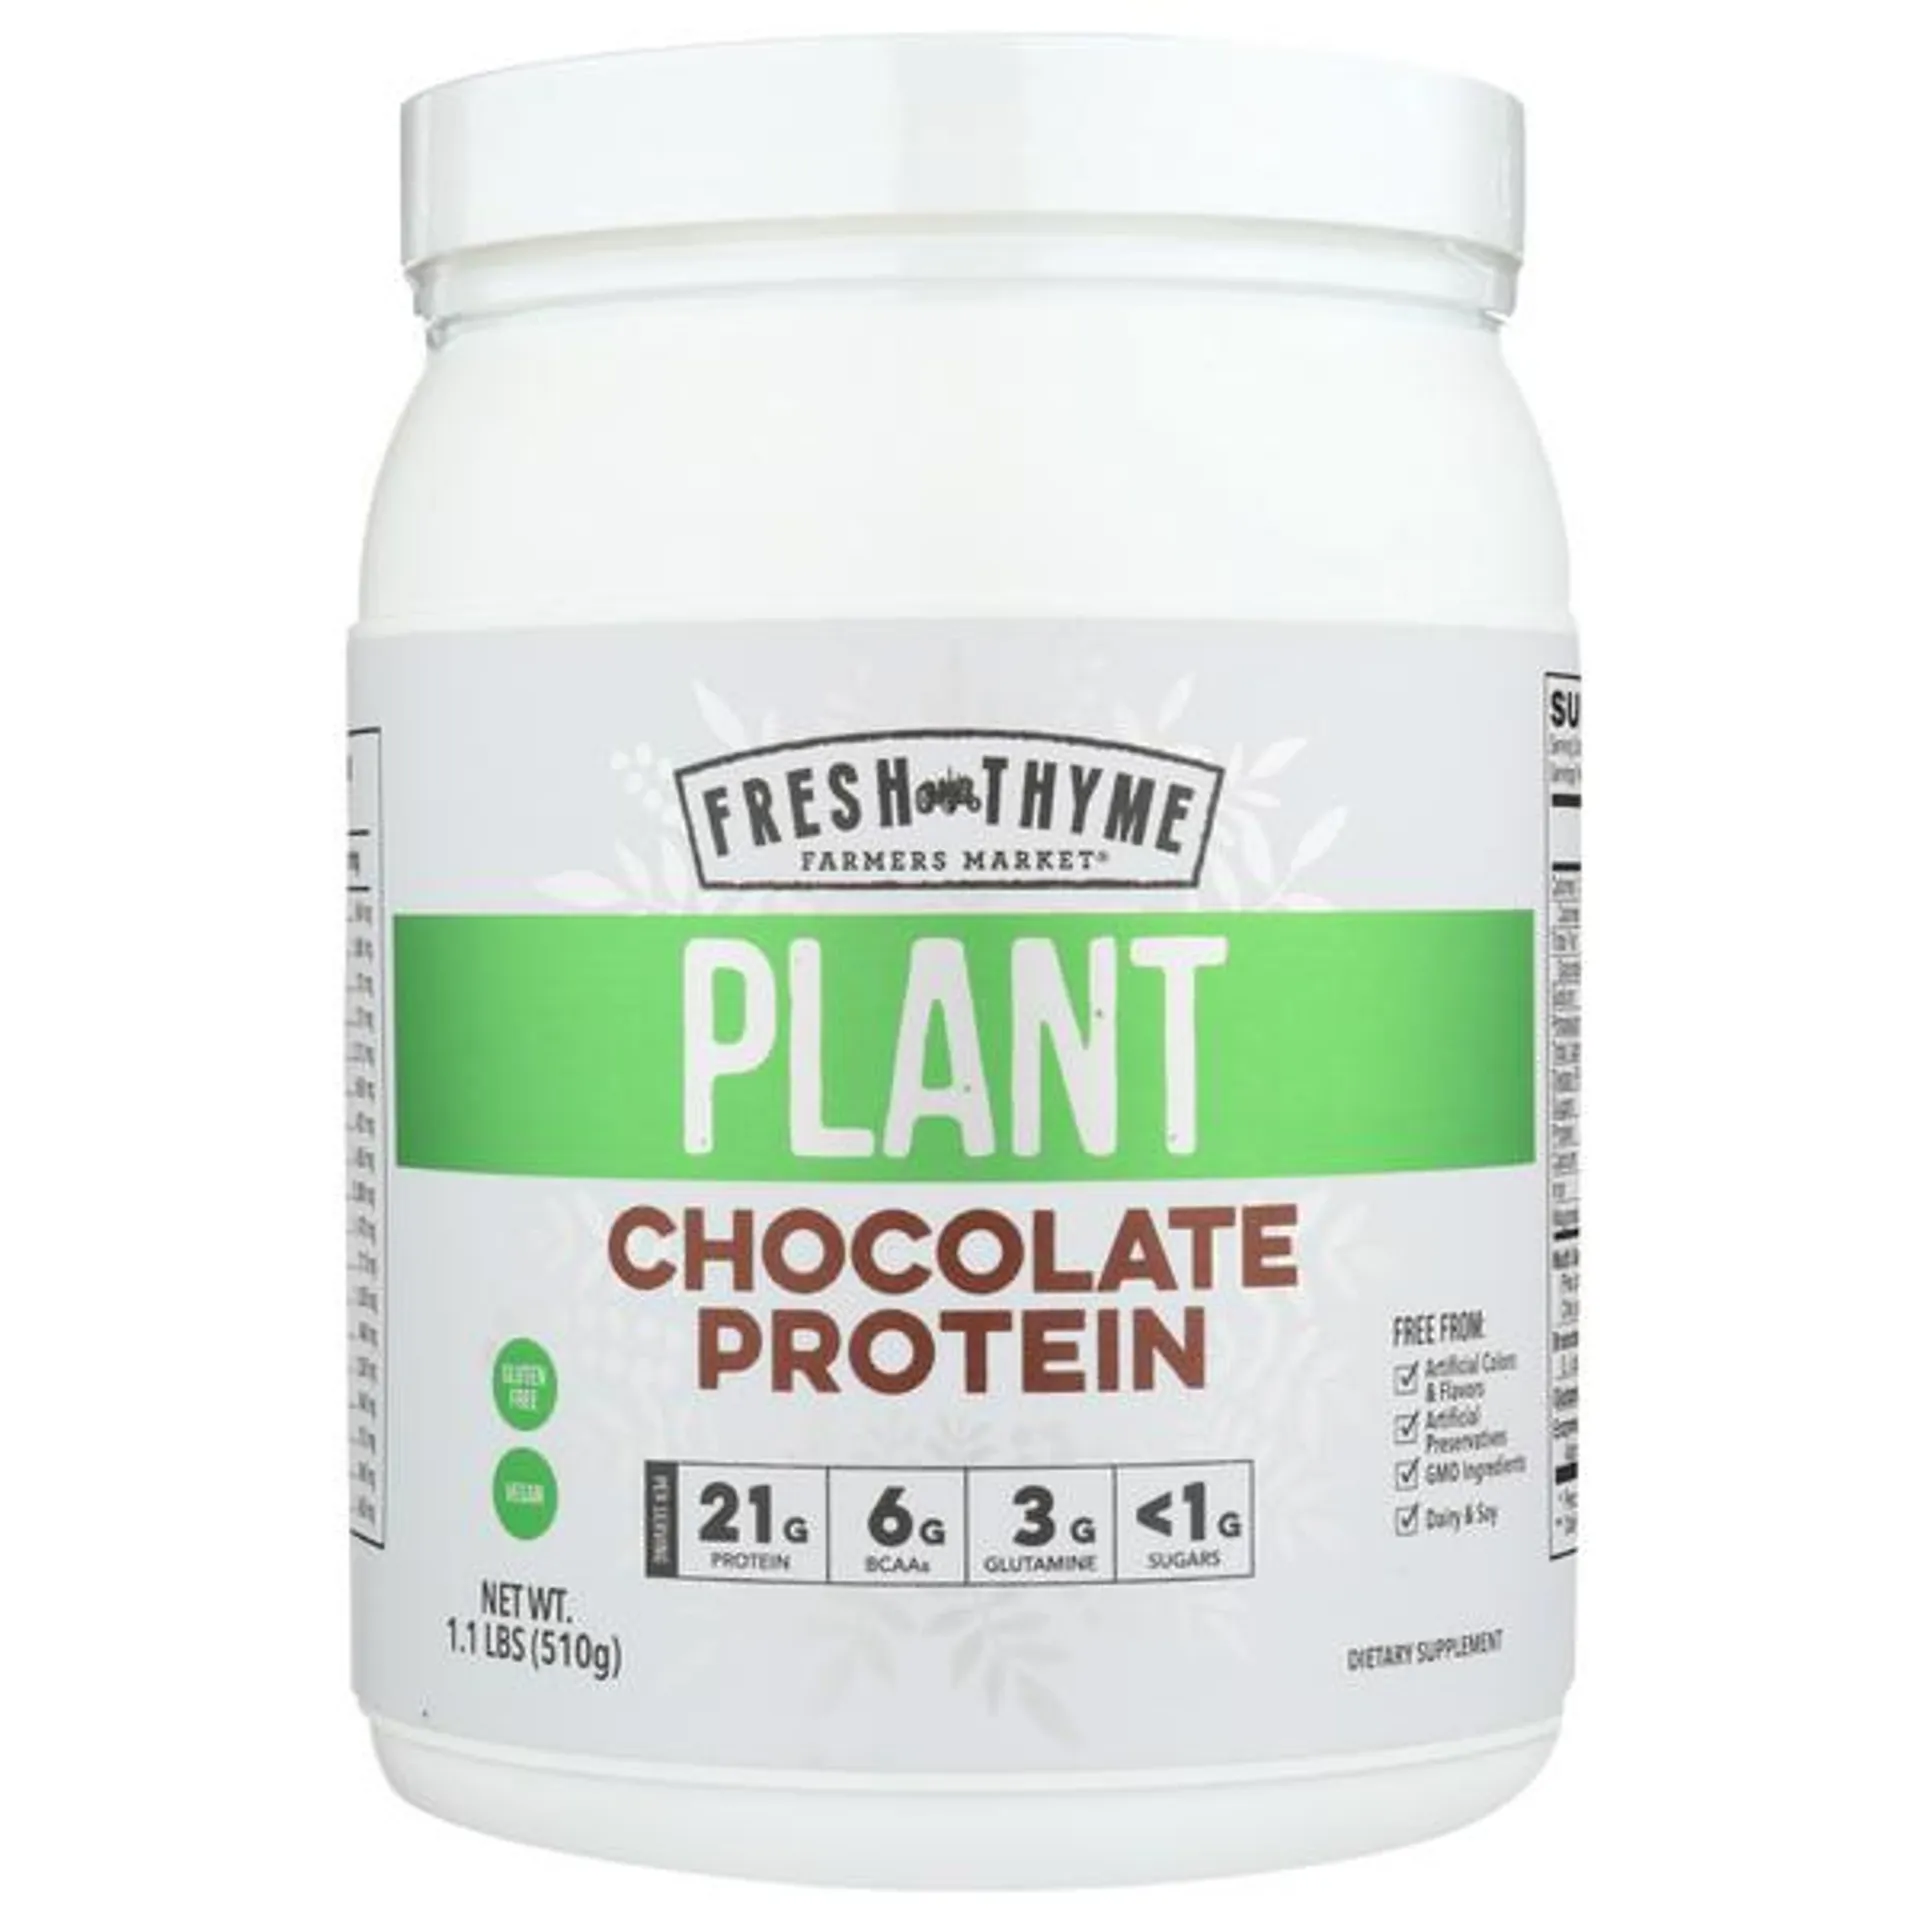 Fresh Thyme Chocoloate Plant Protein - 17.6 Ounce